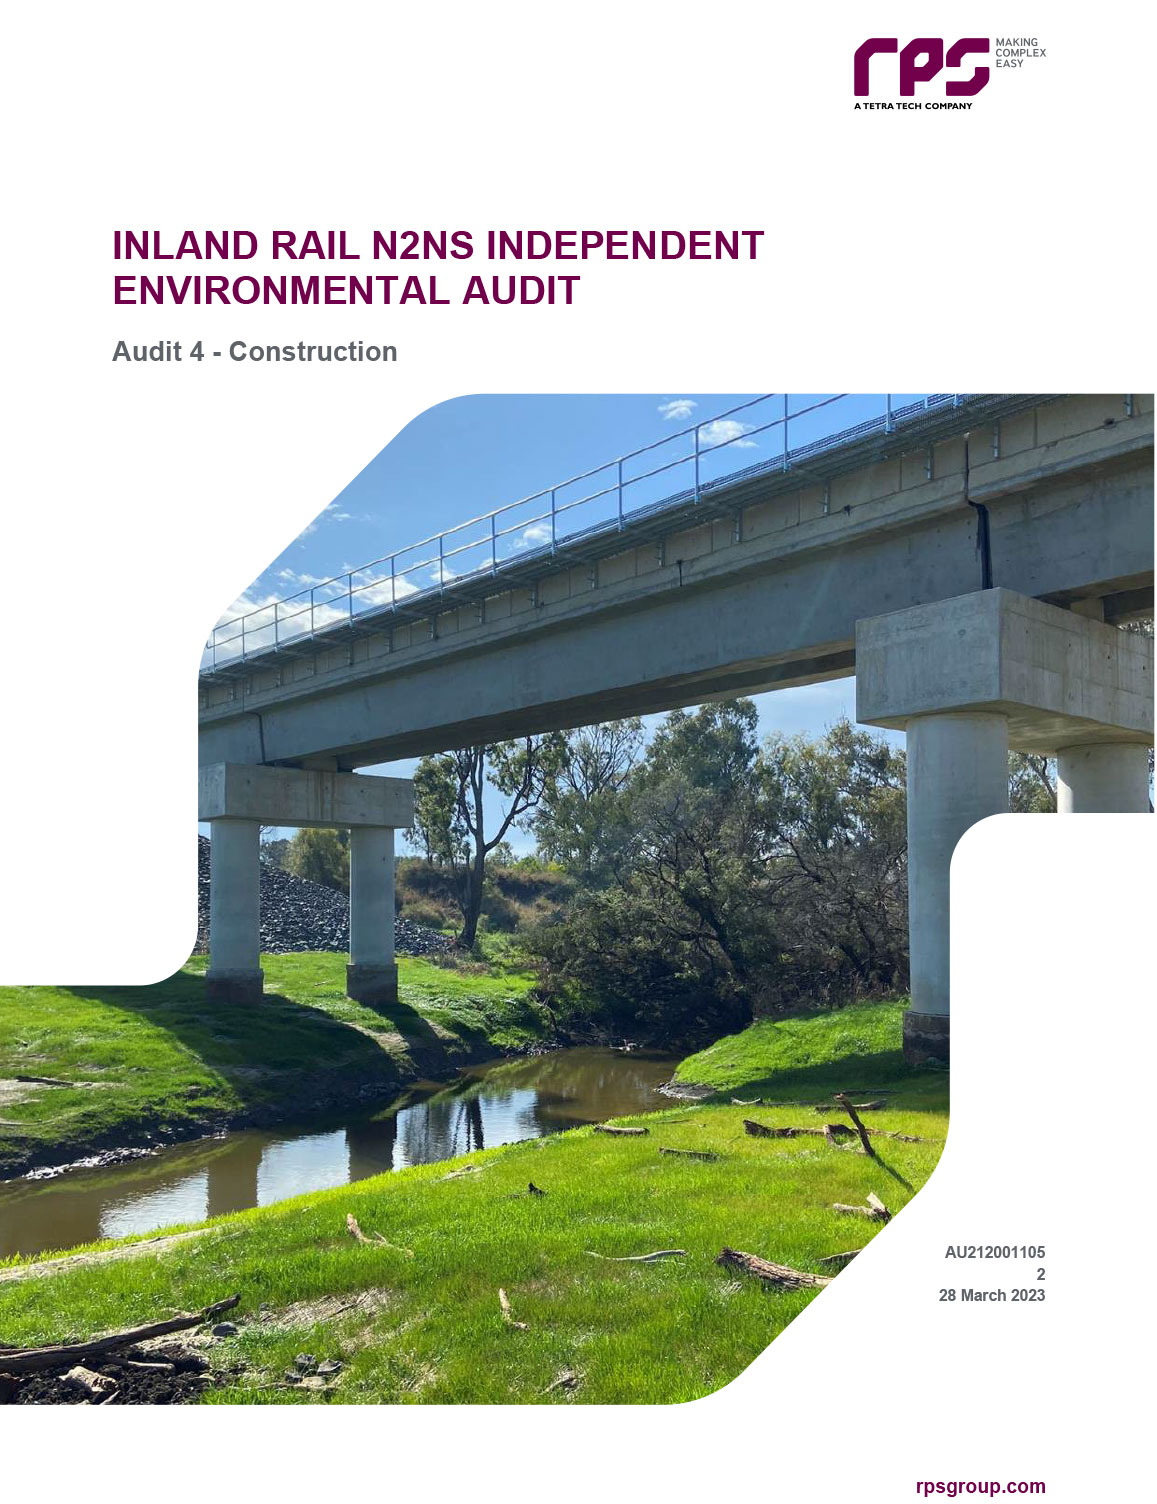 Image thumbnail for Narrabri to North Star Phase 1 Independent Environmental Audit: Audit 4 – Construction